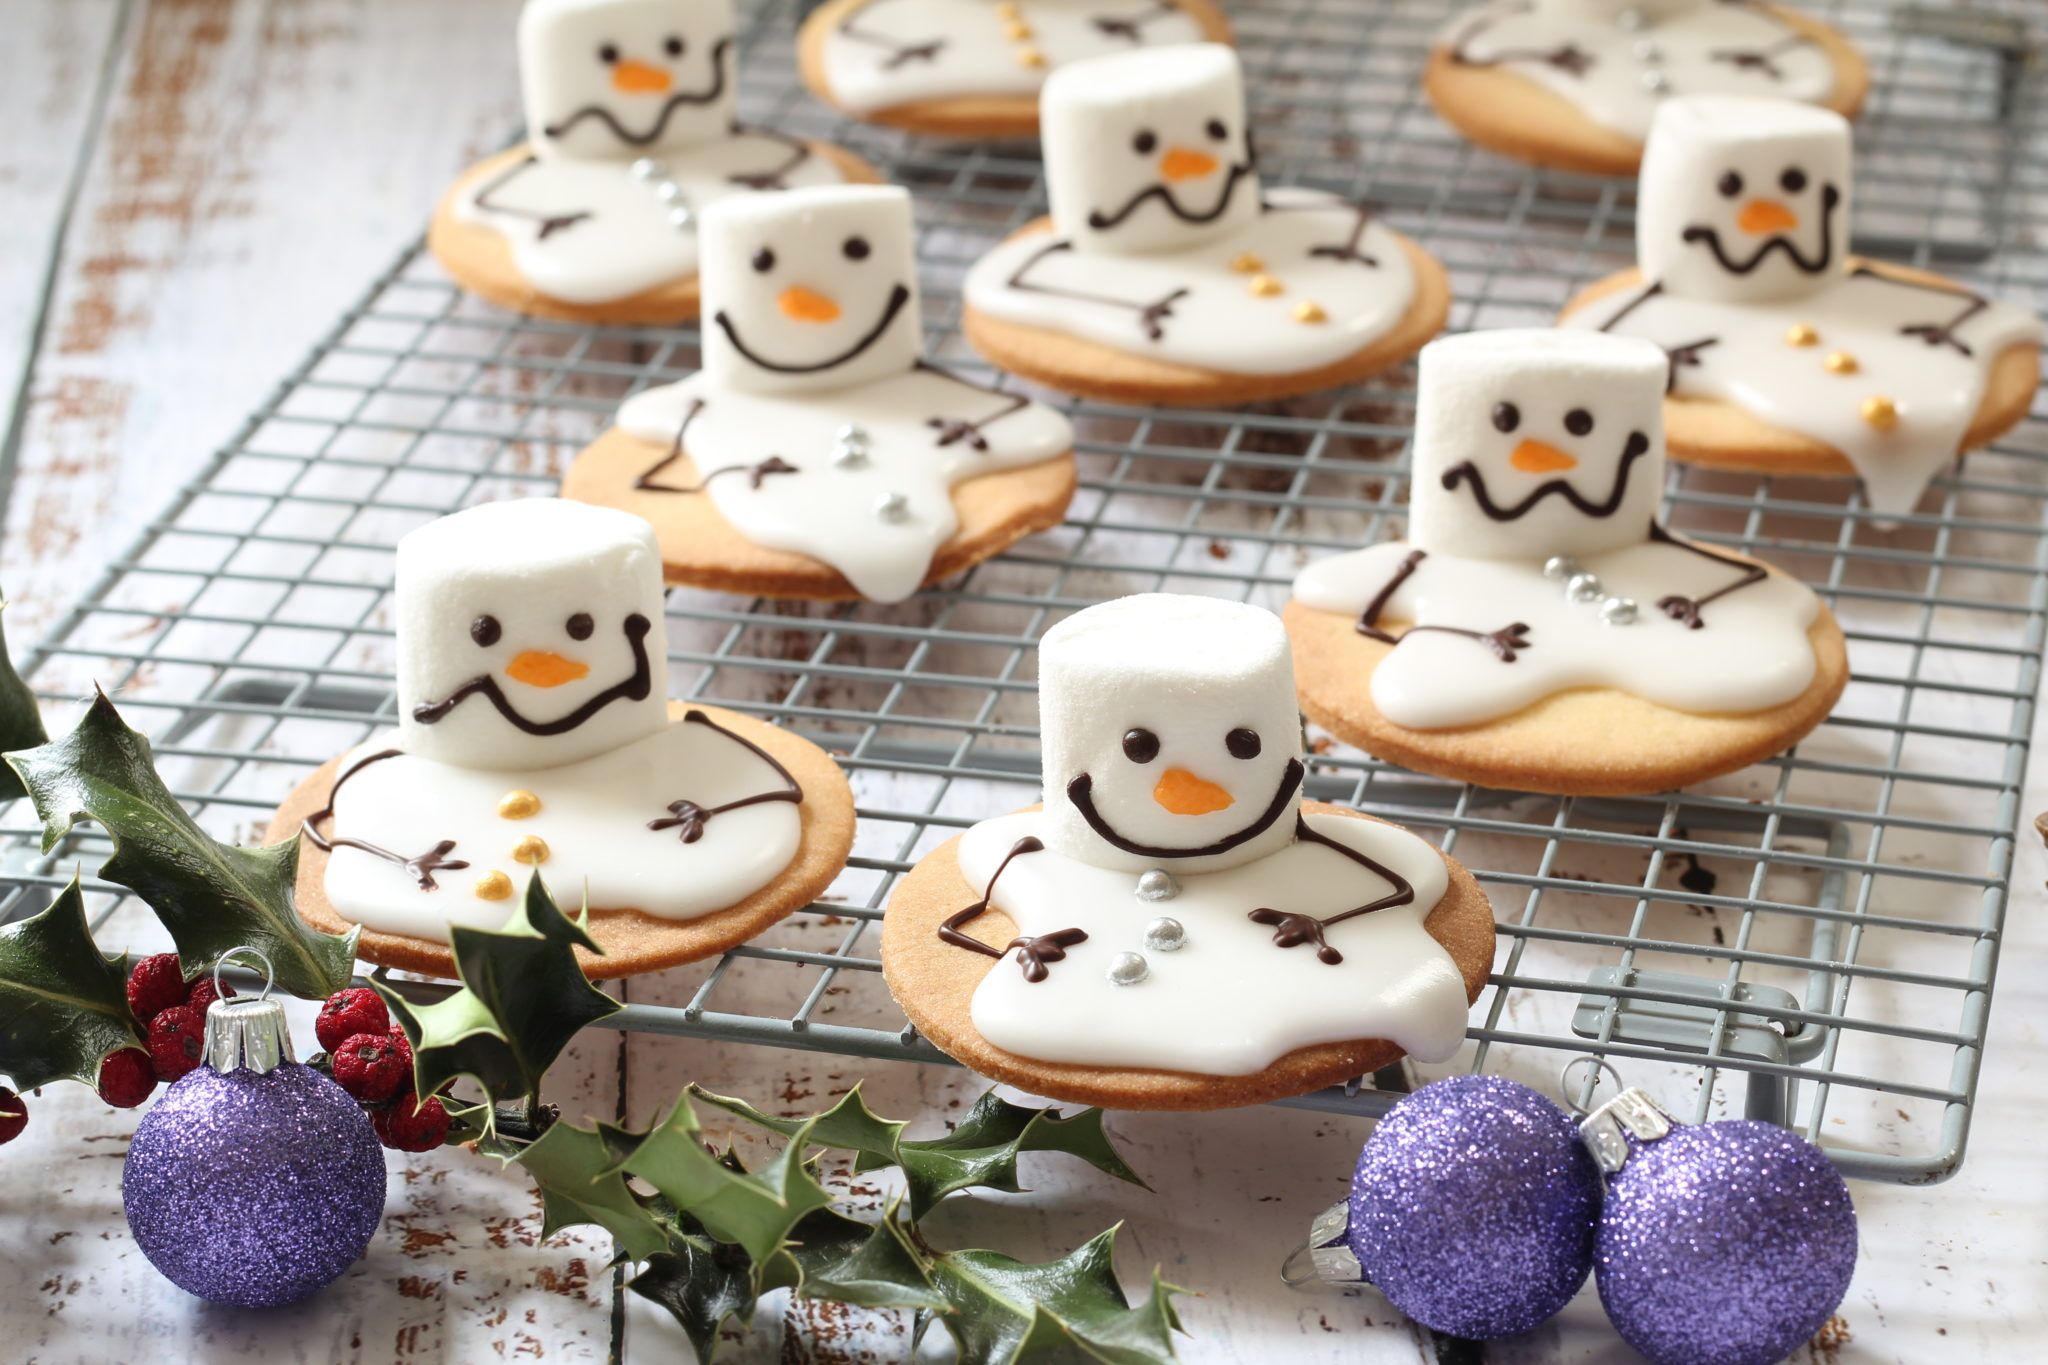 These melted snowmen biscuits are seriously cute: Here's how to make them